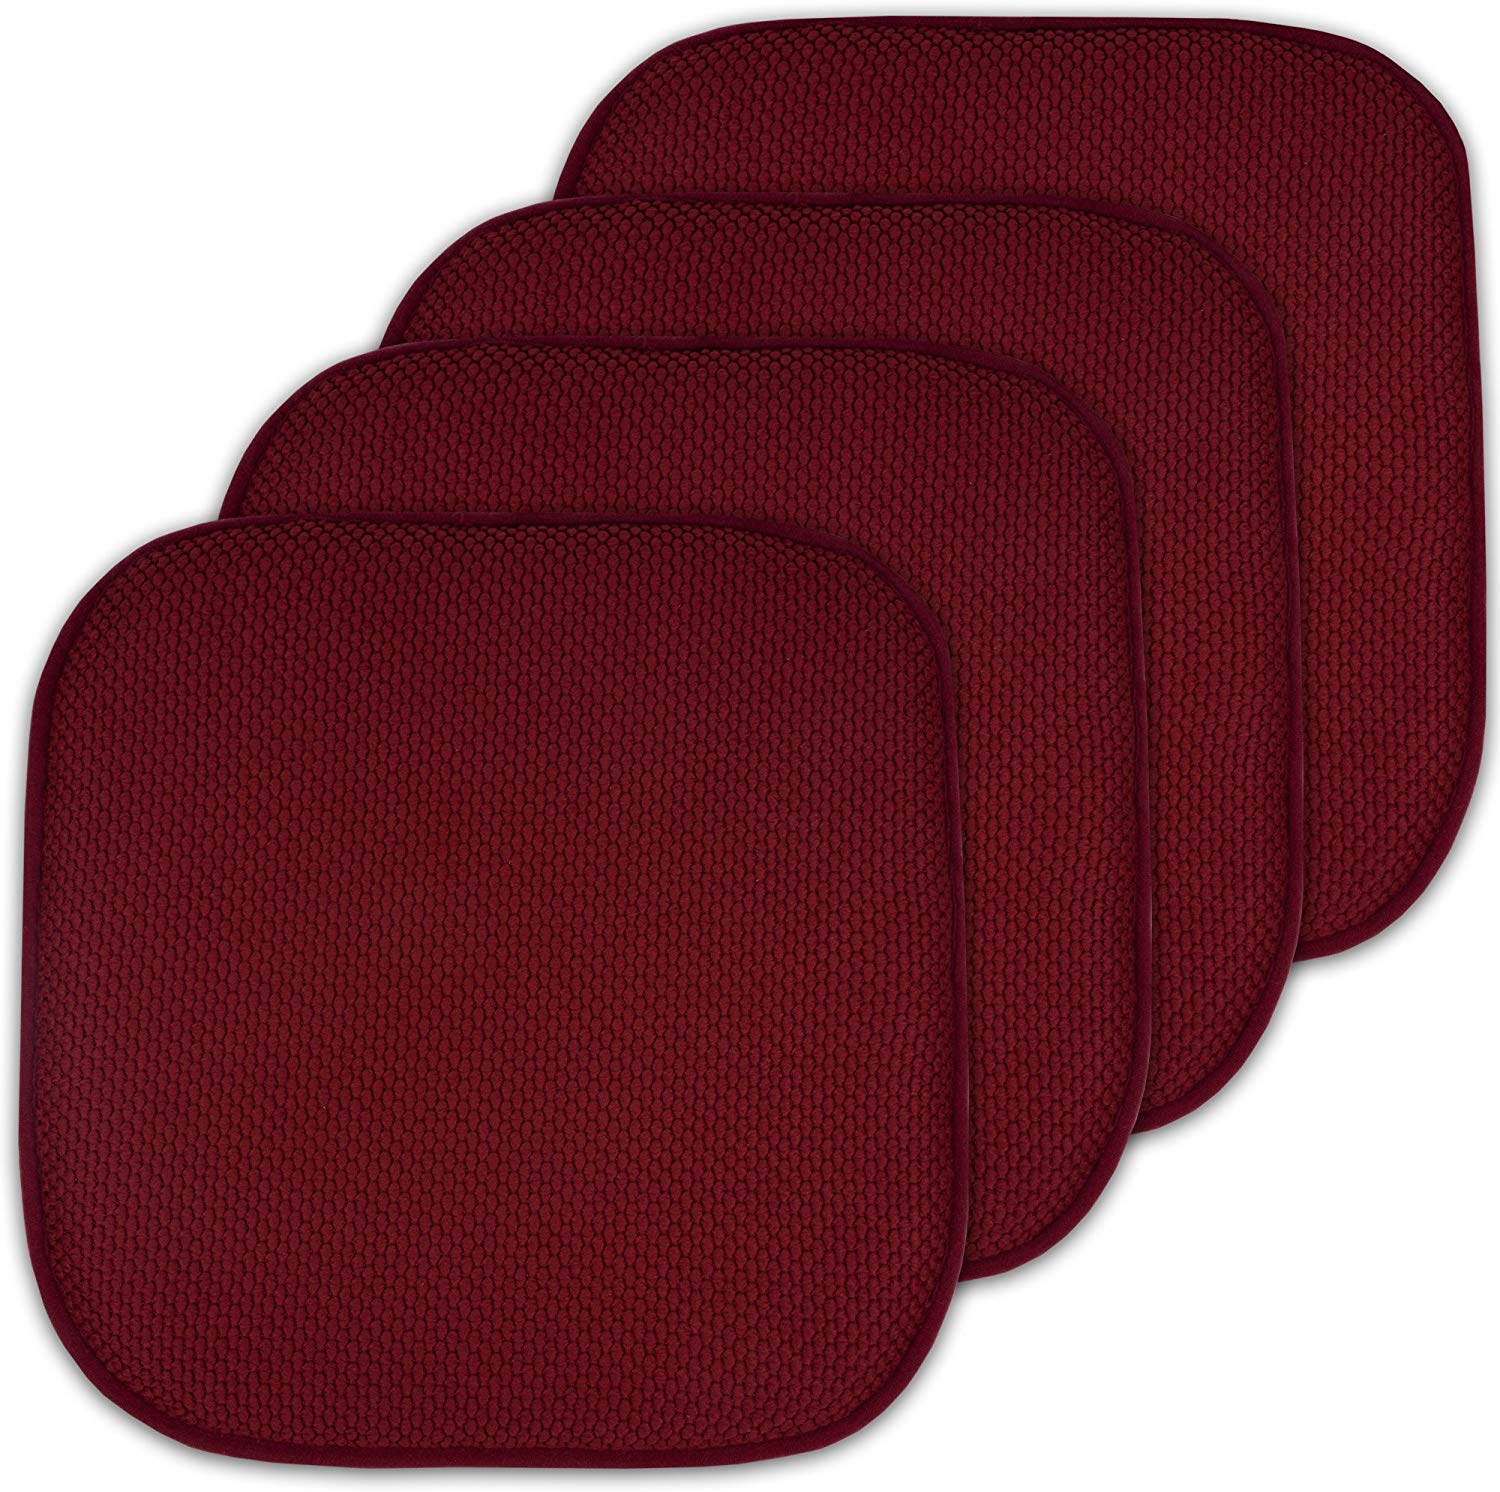 Gorilla Grip Extra Thick Tufted Chair Pad Memory Foam Cushions, Pack of 4 Comfortable Seat Cushion, Durable Slip Resistant, Dini